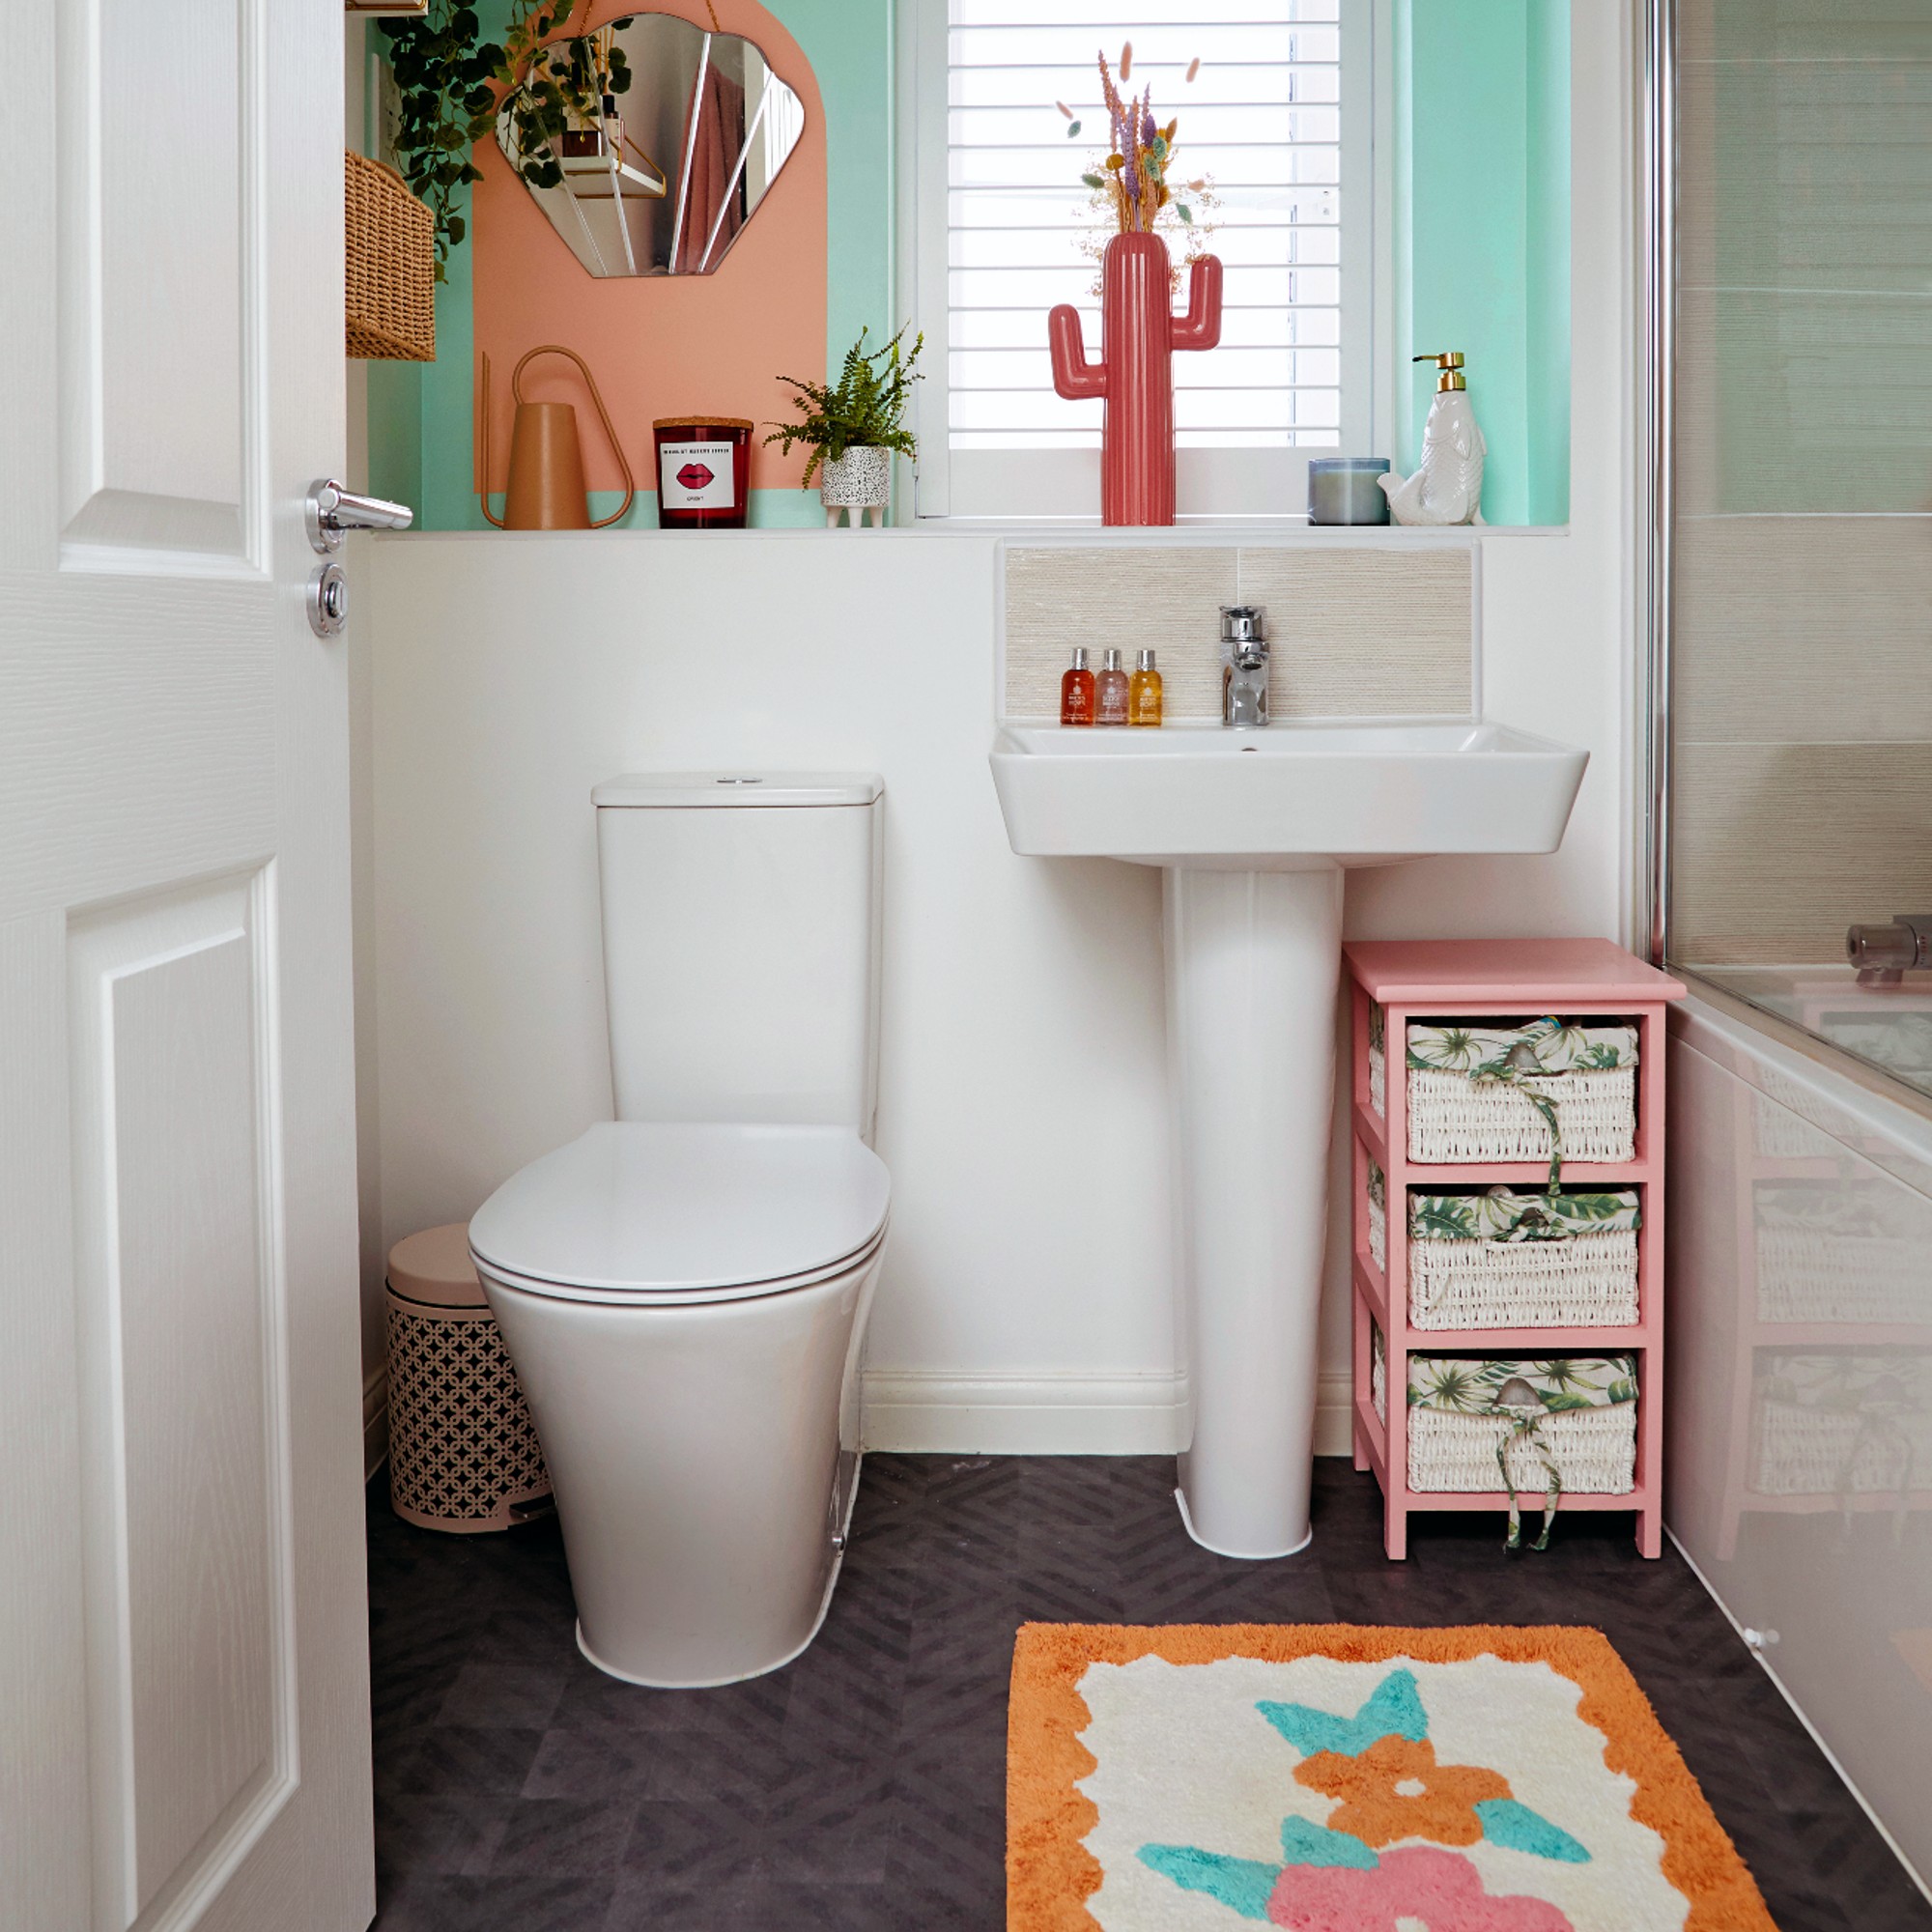 White bathroom with toilet, sink, bath and decorated with colourful bath mat